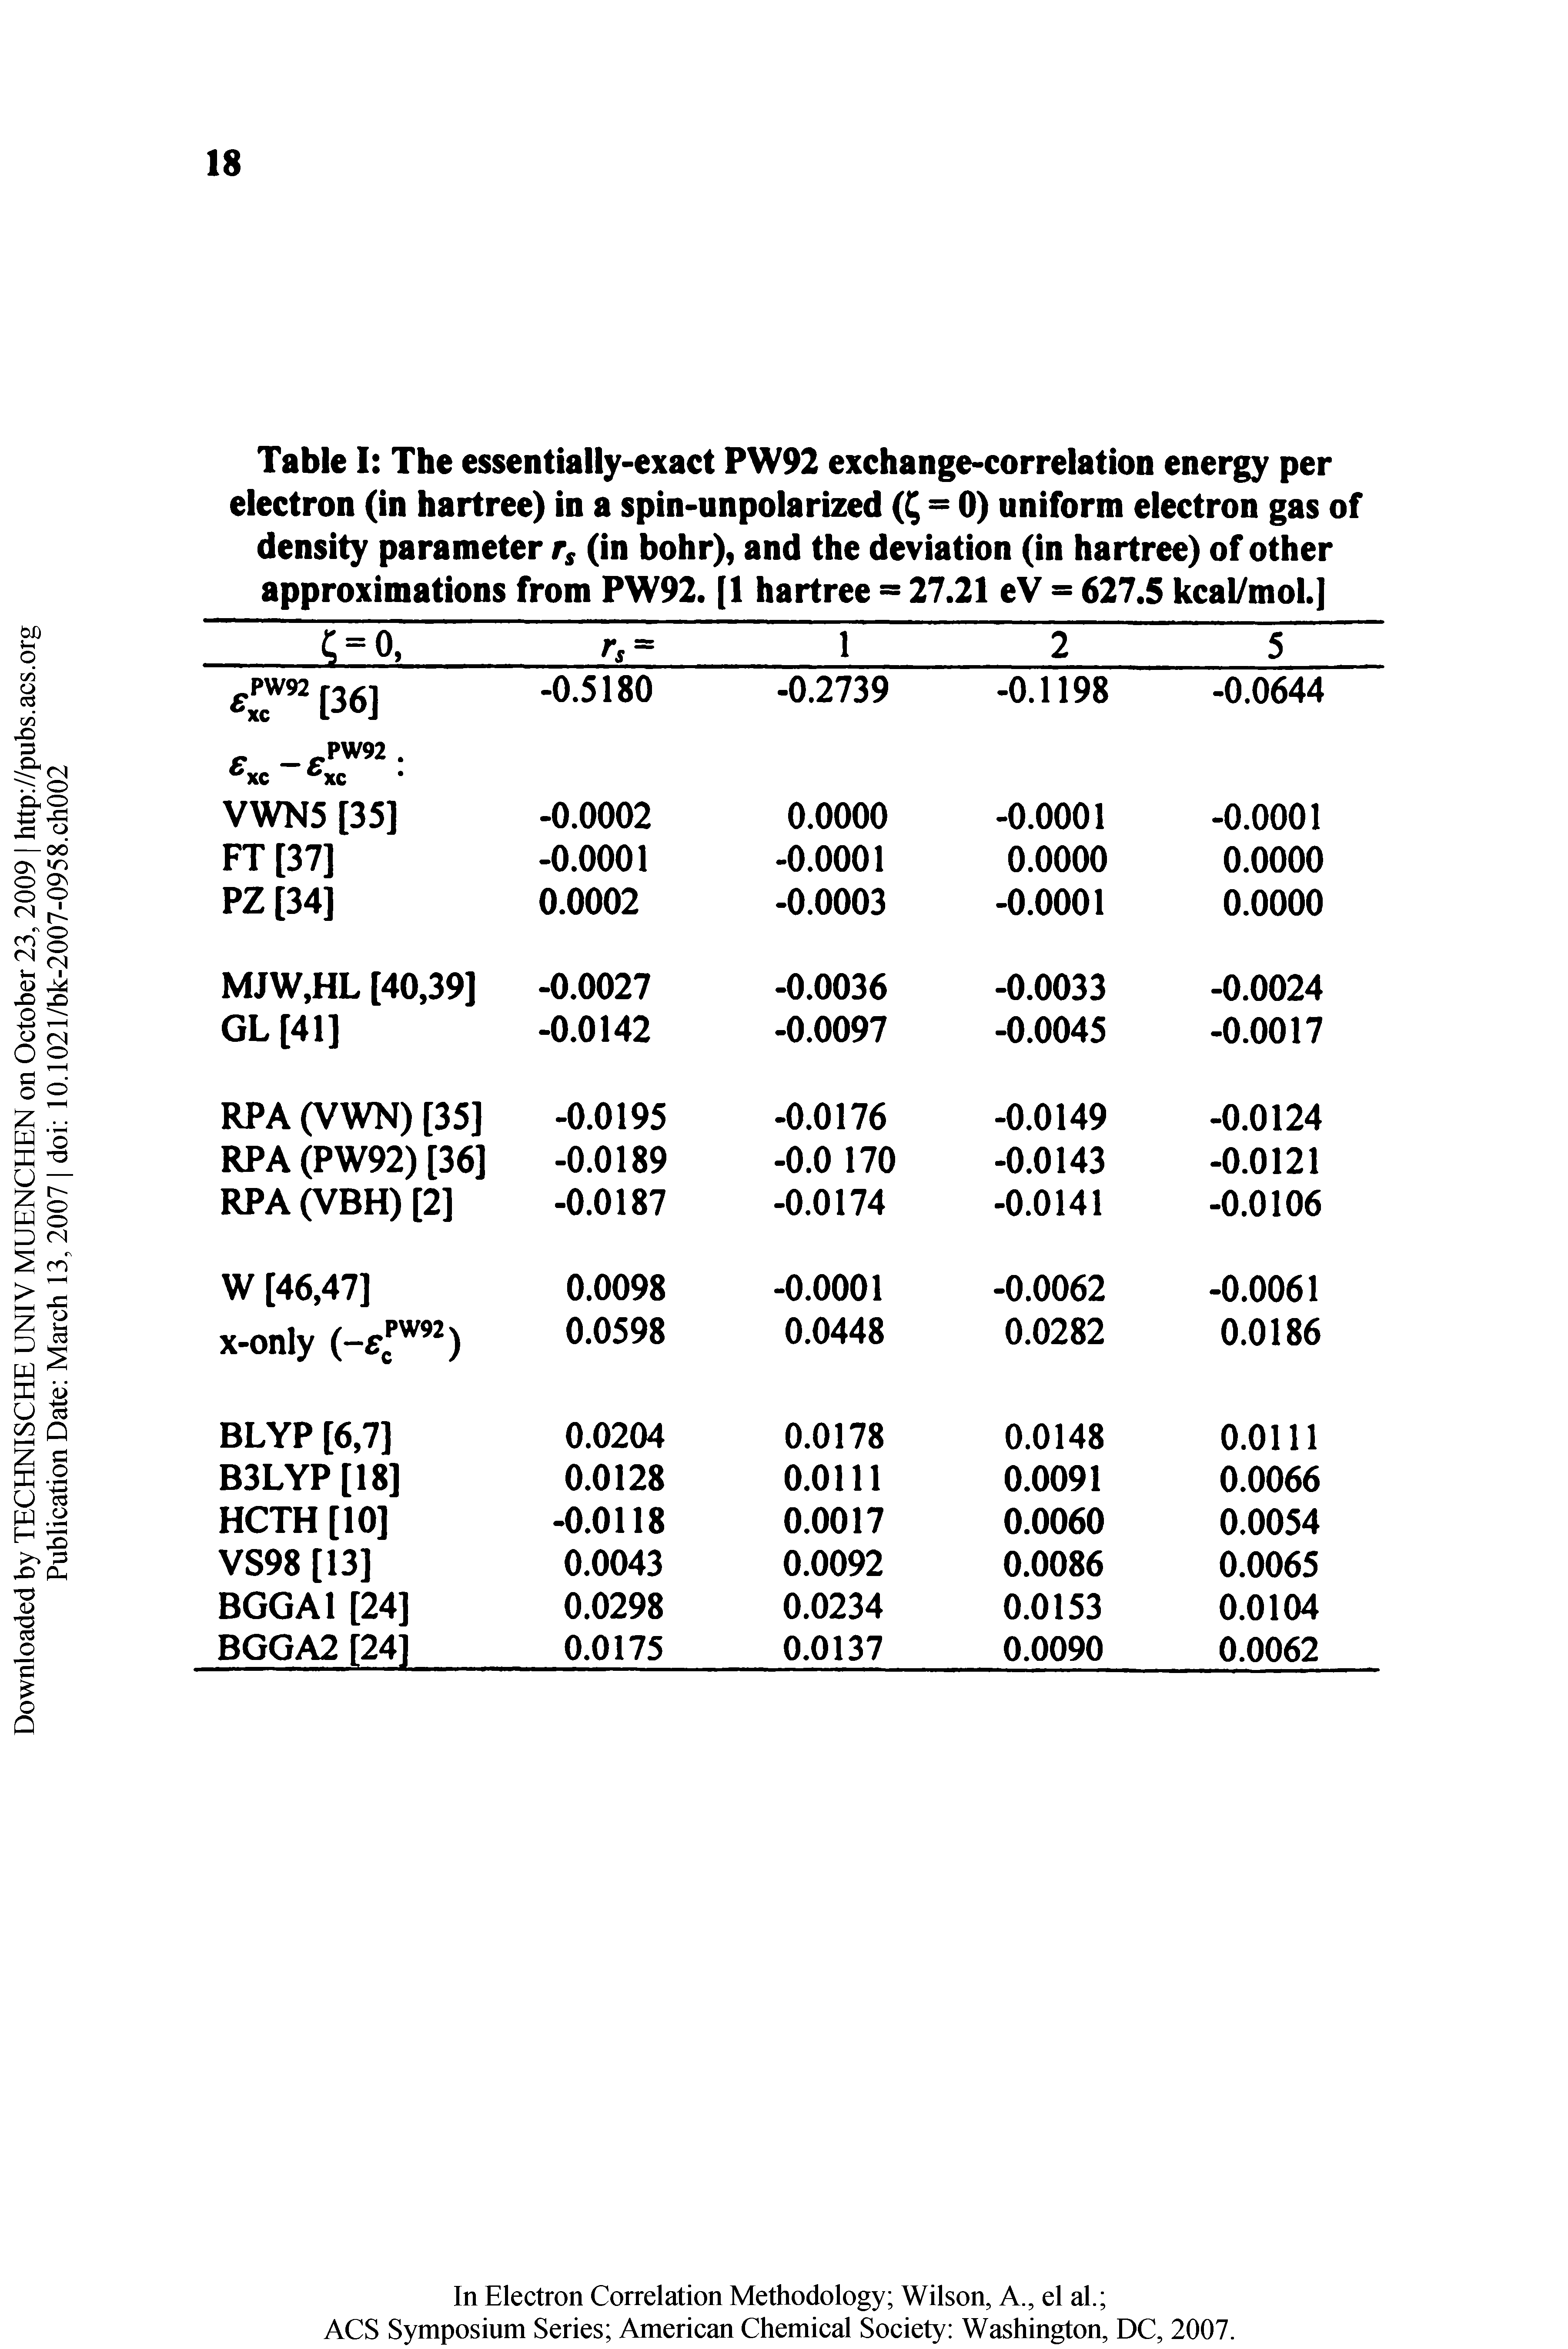 Table I The essentially-exact PW92 exchange-correlation energy per electron (in hartree) in a spin-unpolarized = 0) uniform electron gas of density parameter (in bohr), and the deviation (in hartree) of other approximations from PW92. (1 hartree = 27.21 eV = 627.5 kcal/moi.]...